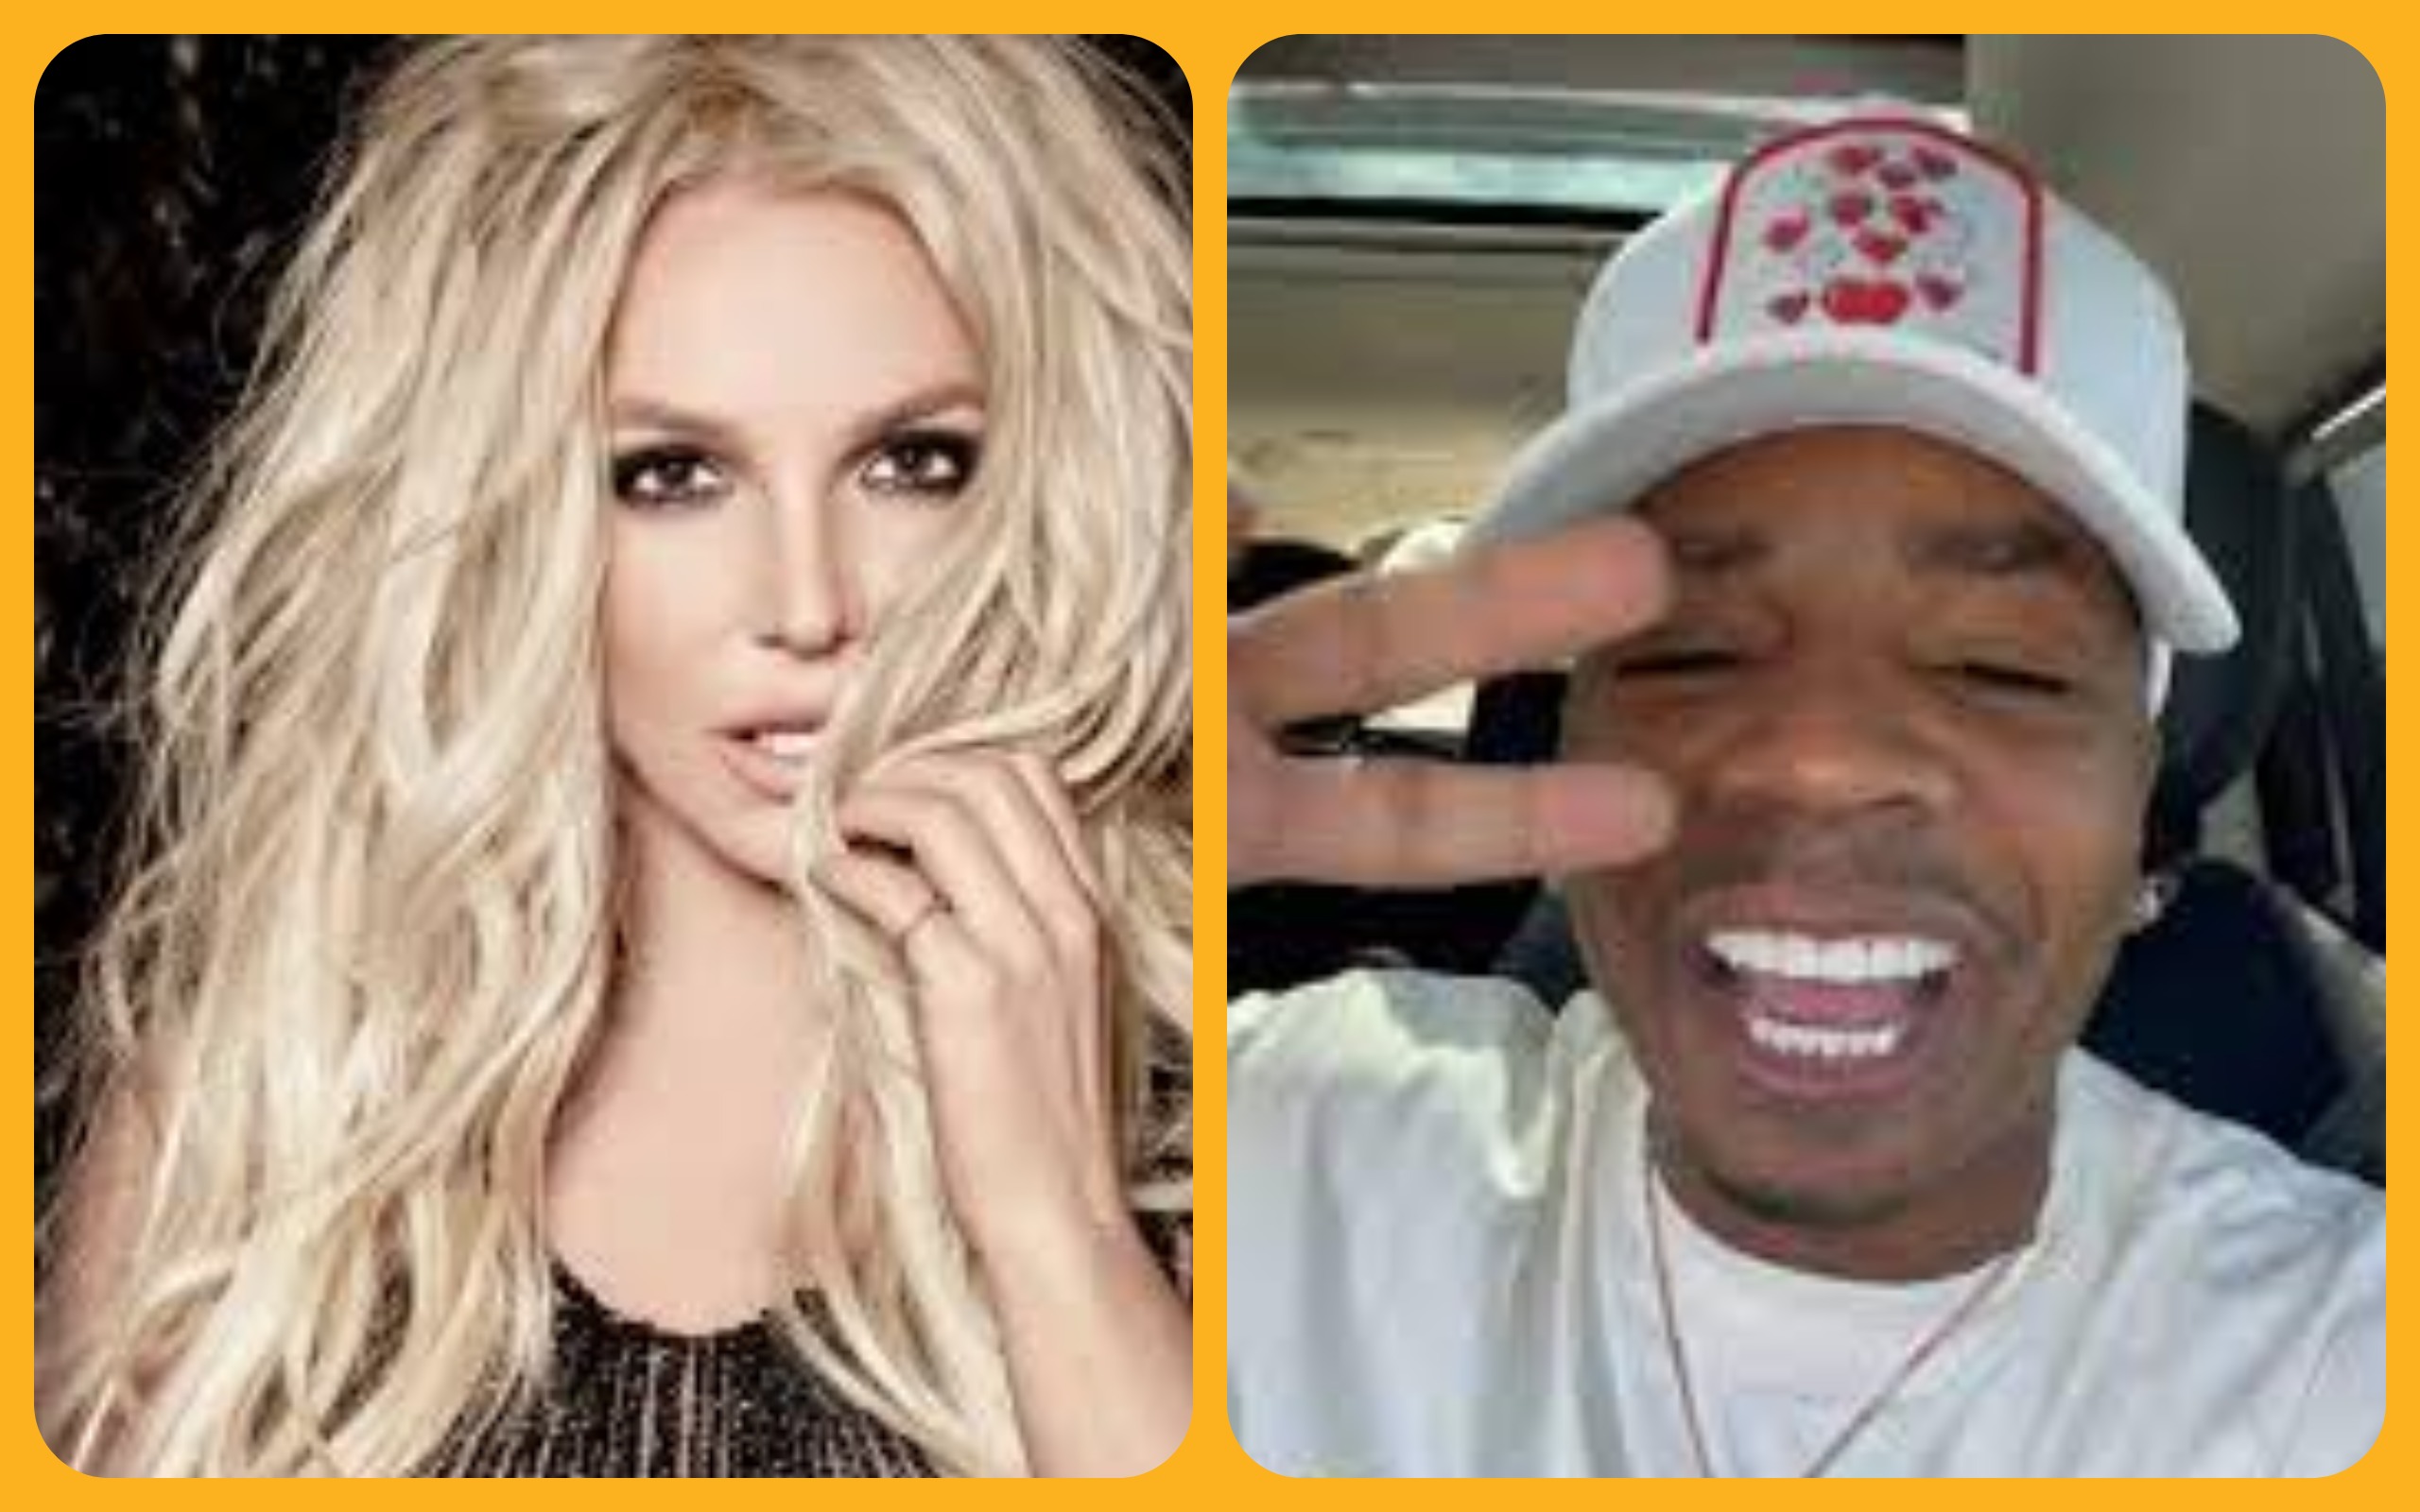 Plies was able to revel in his Britney Spears fandom when a lookalike